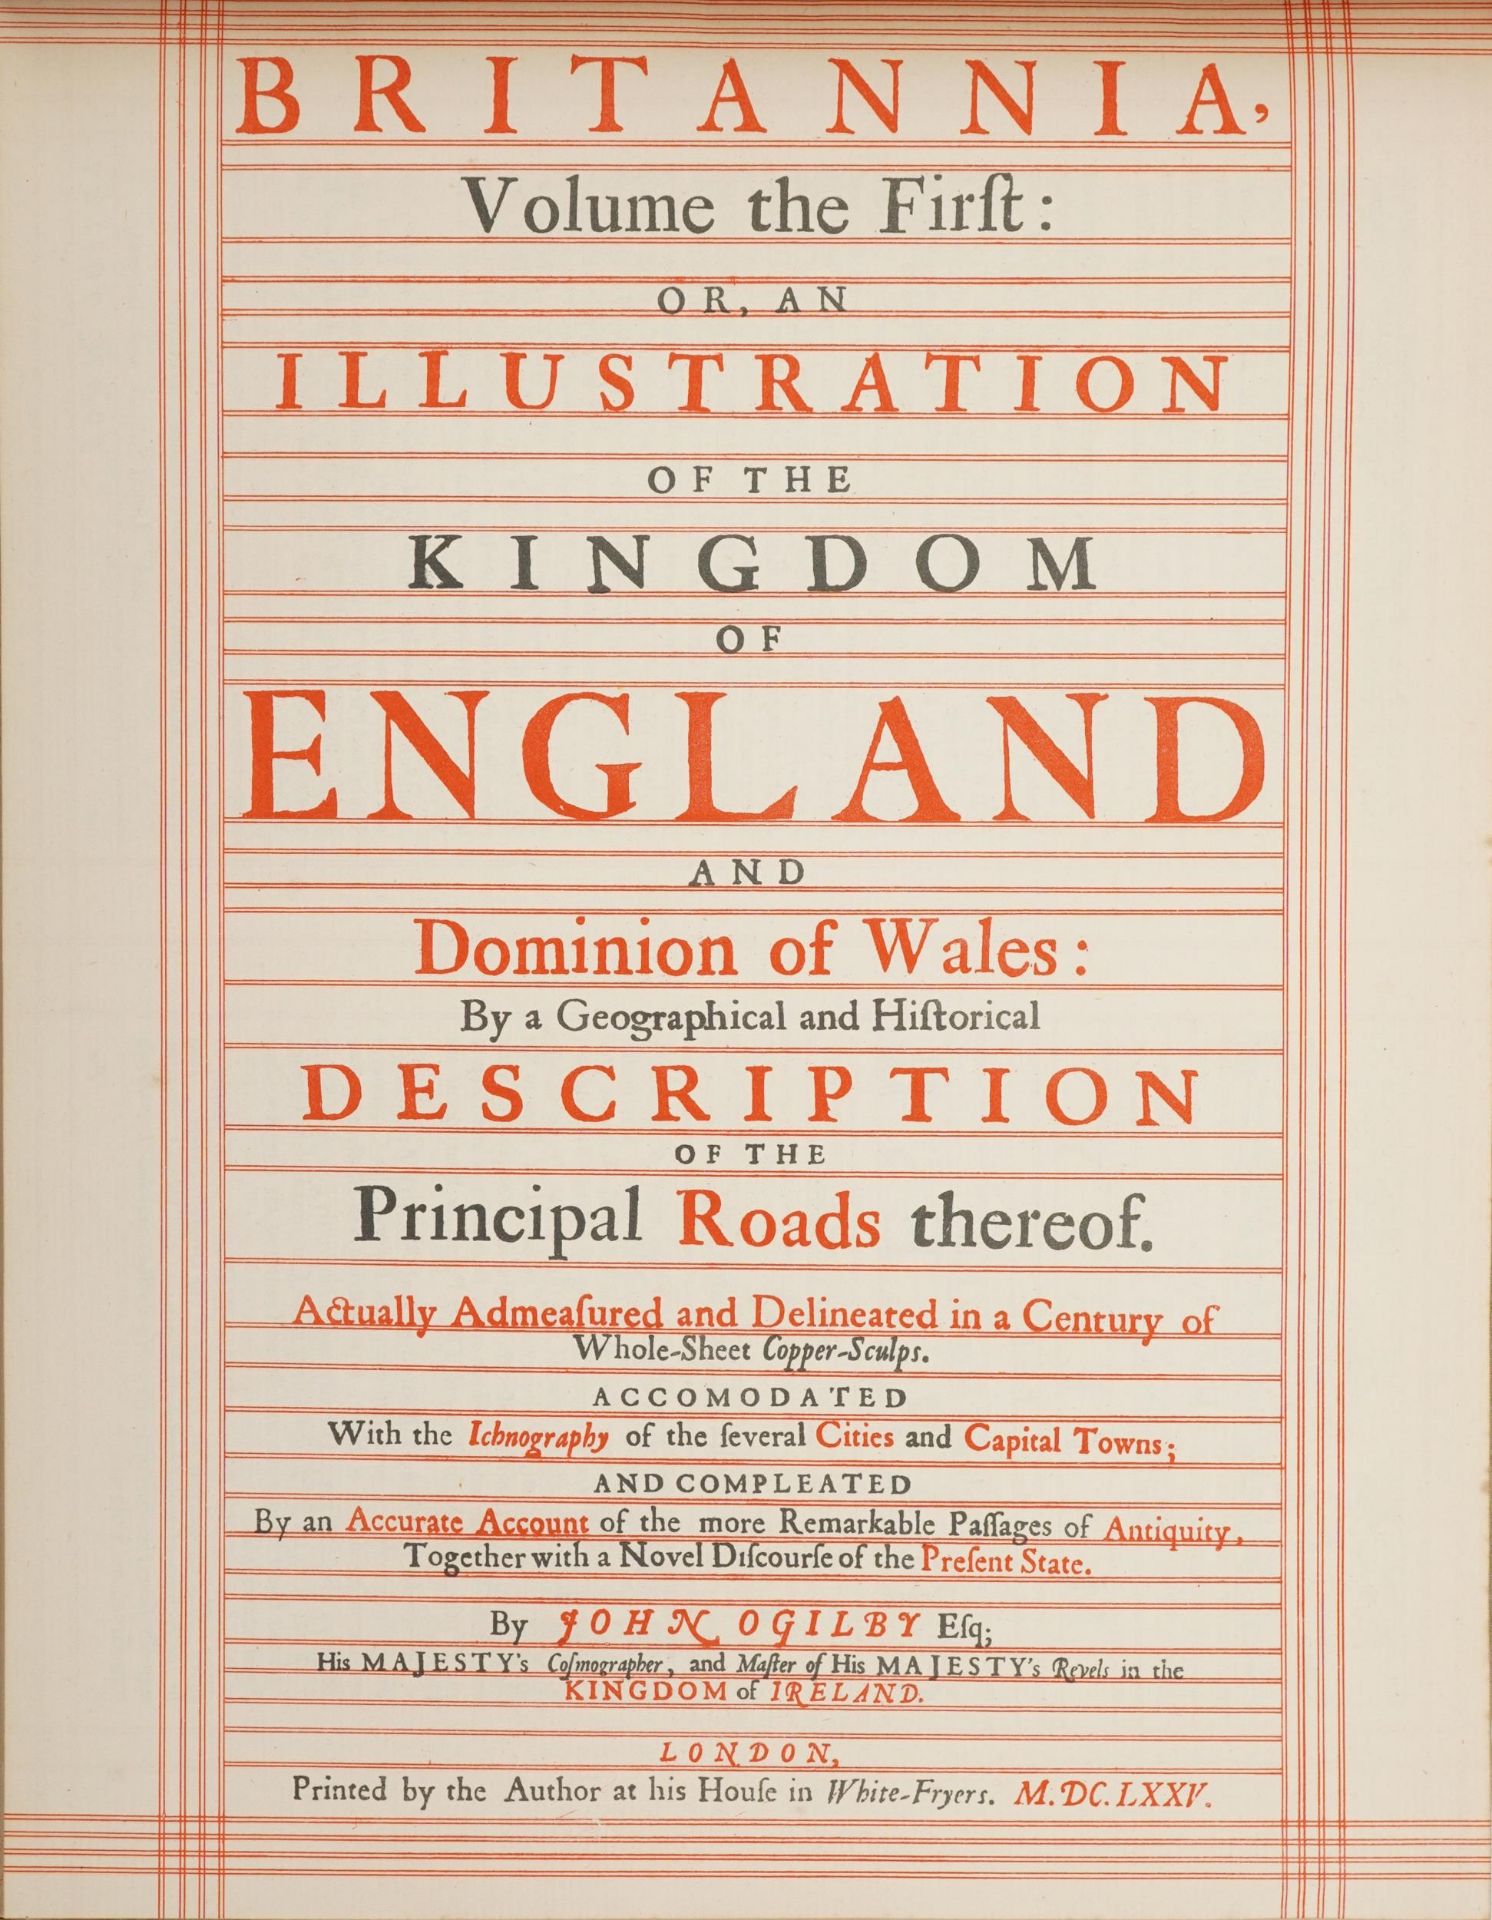 Britannia, volume 1 The First Illustration of the Kingdom of England by John Ogilby with coloured - Image 2 of 7